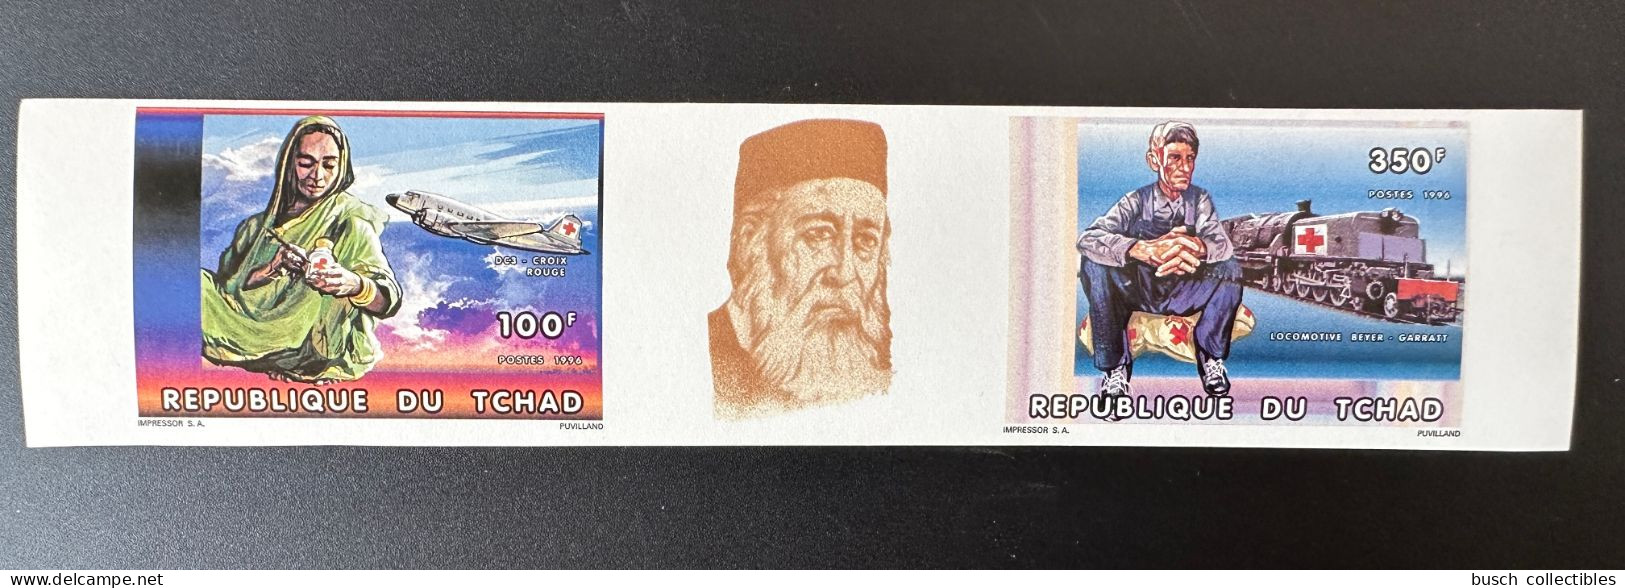 Tchad Chad Tschad 1996 IMPERF ND Mi. 1353a - 1354a A Croix-Rouge Rotes Kreuz Red Cross Henry Dunant Airplane Railways - Henry Dunant